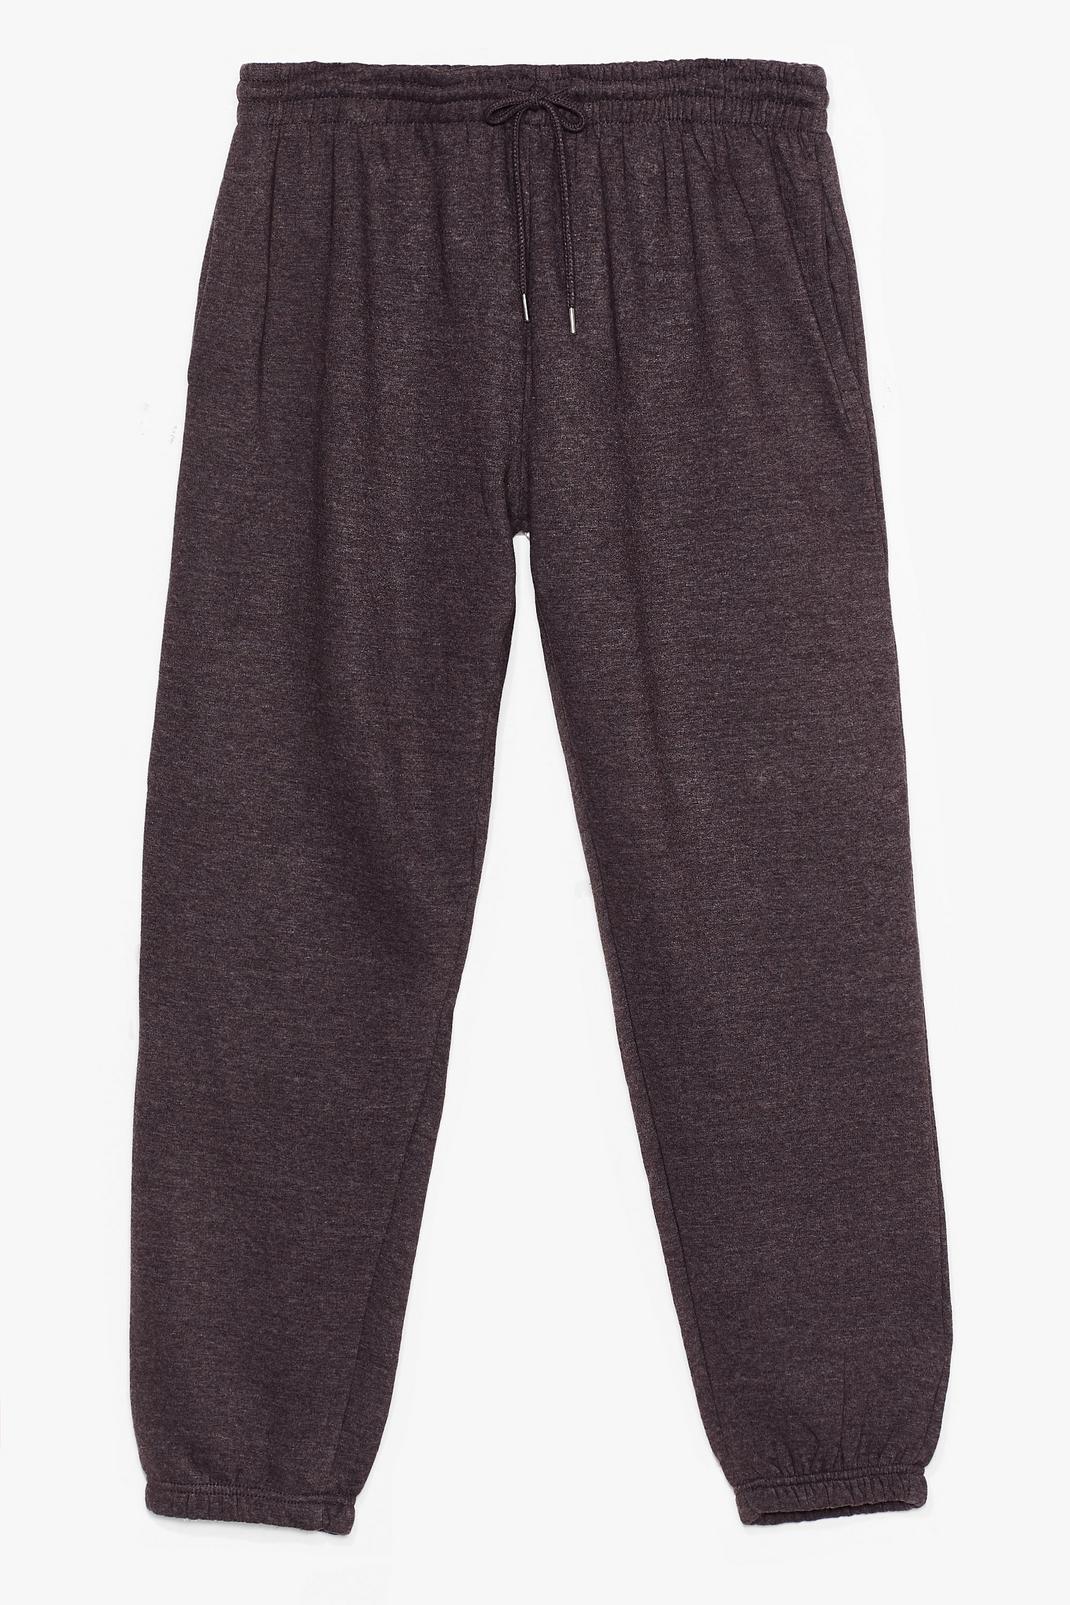 Charcoal Plus Size High Waisted Sweatpants image number 1